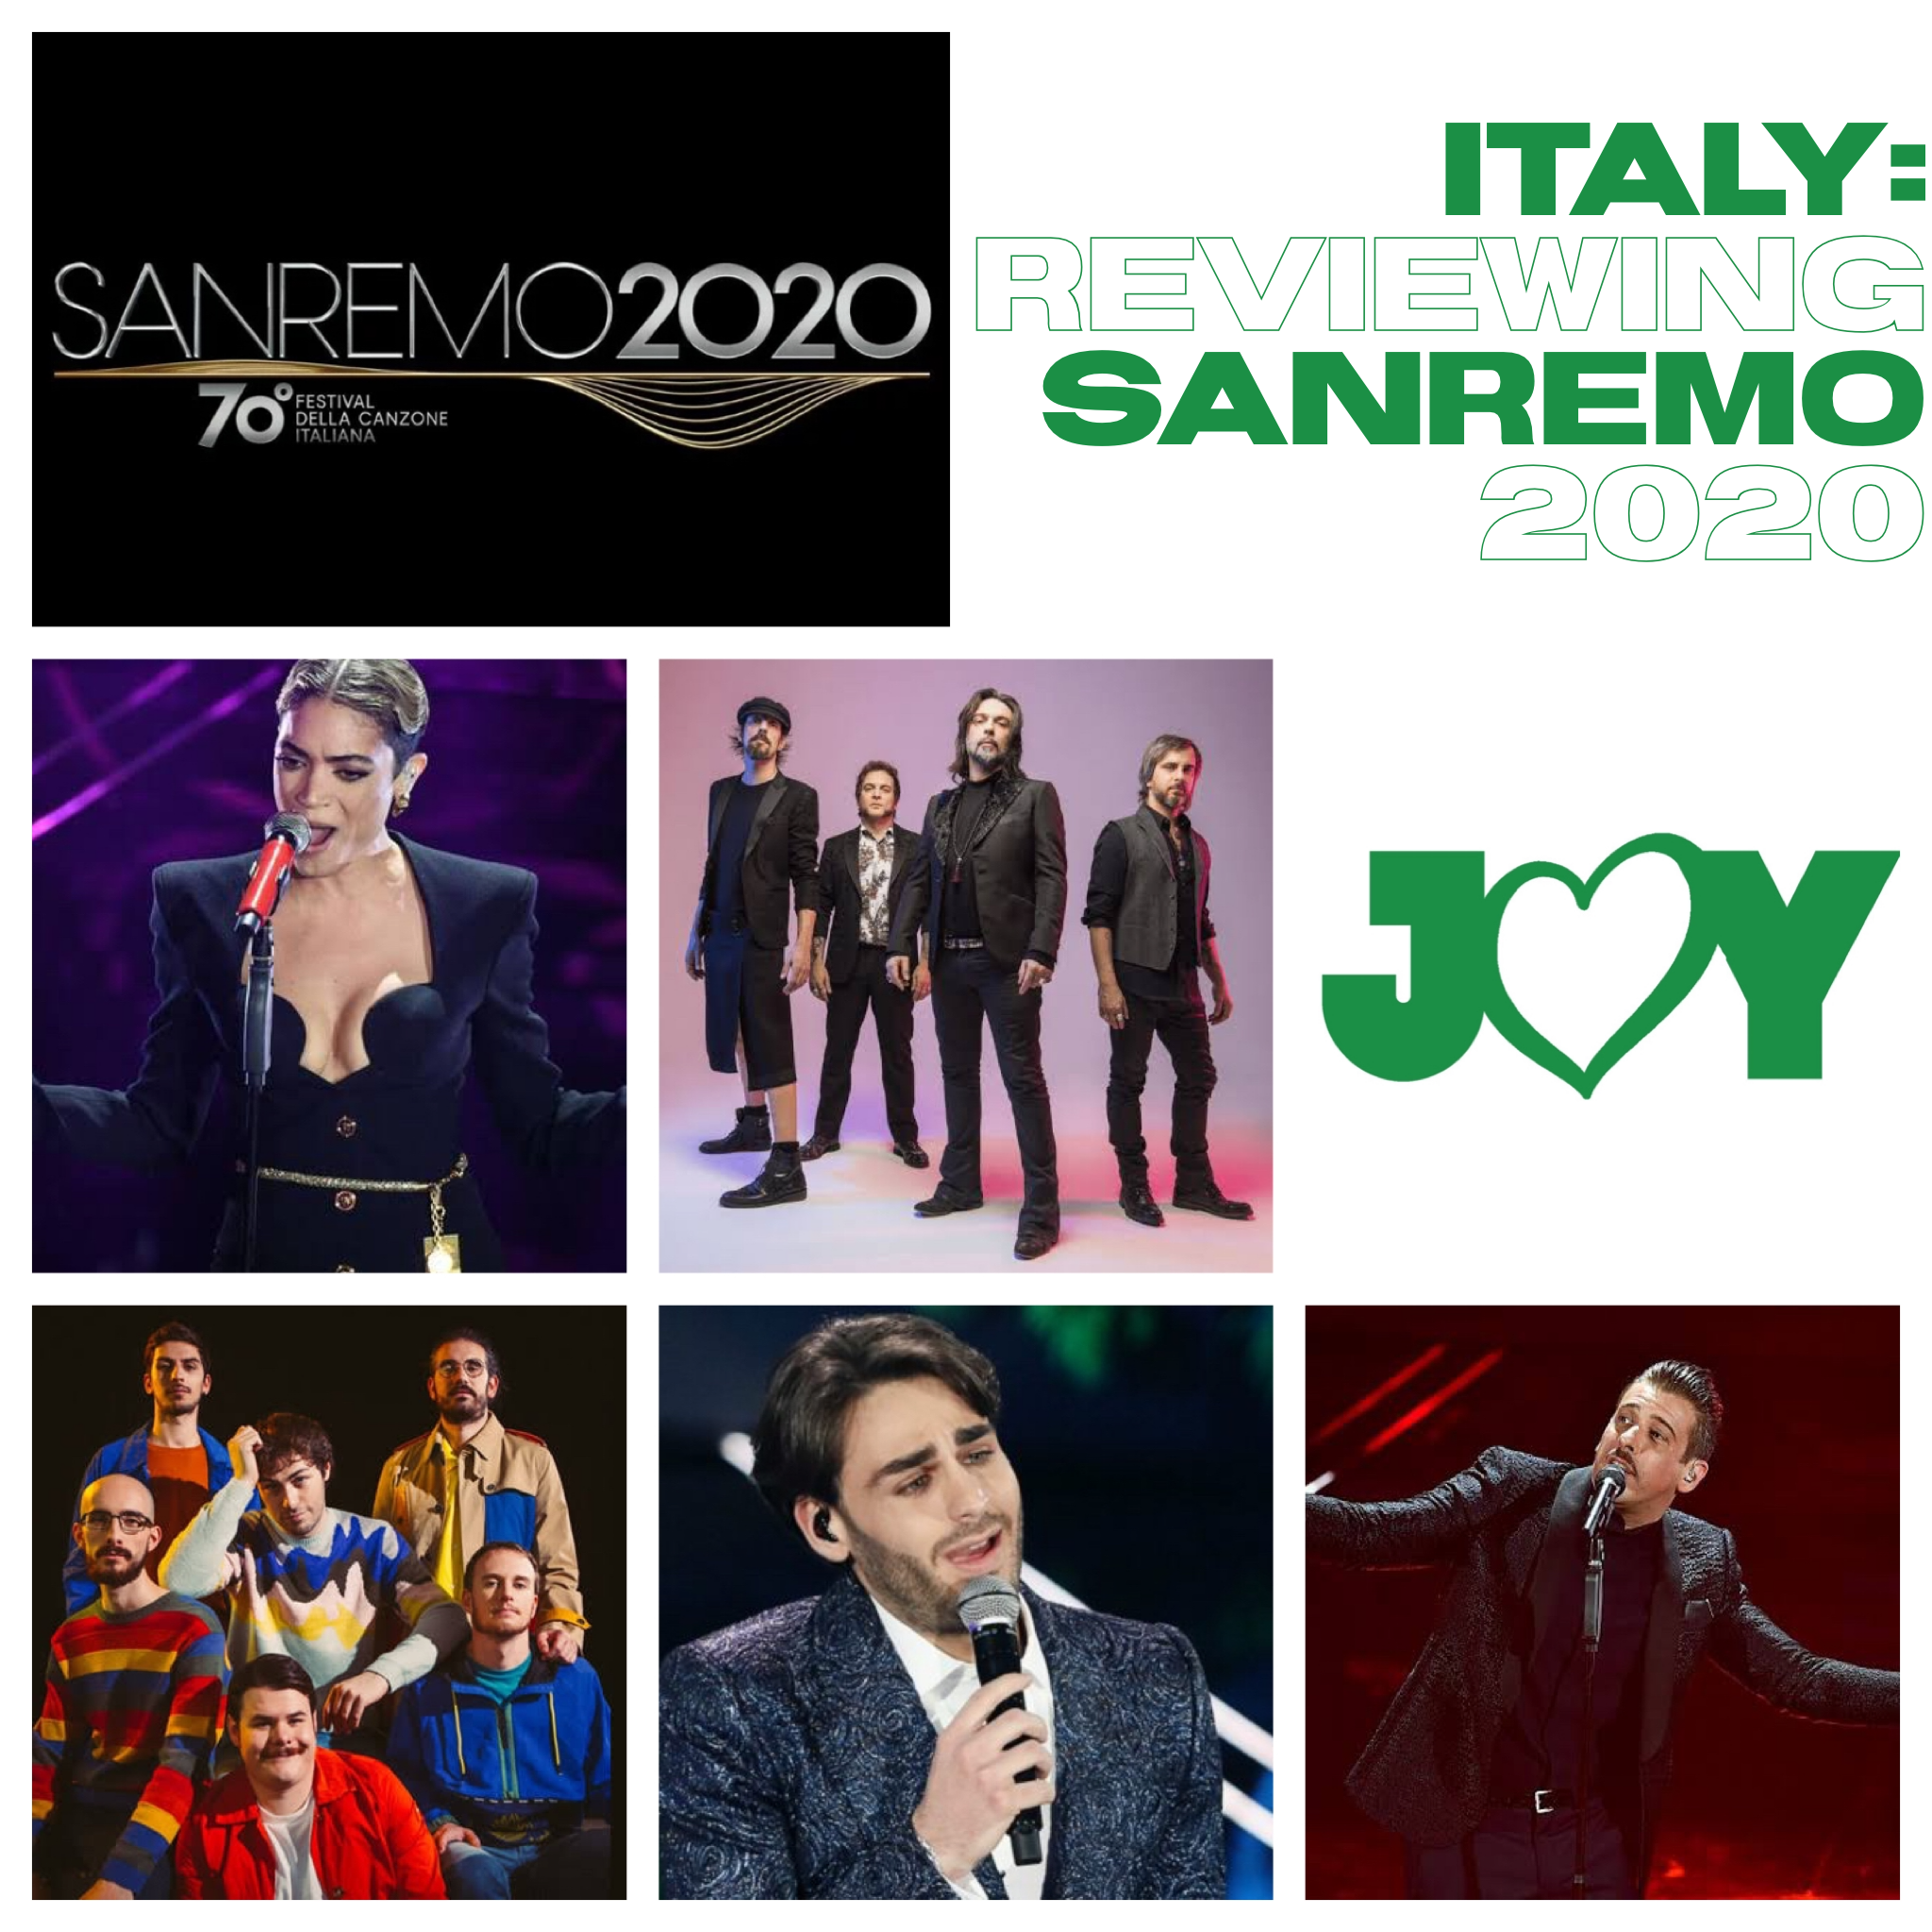 Get your Italian womp on: Reviewing Sanremo 2020